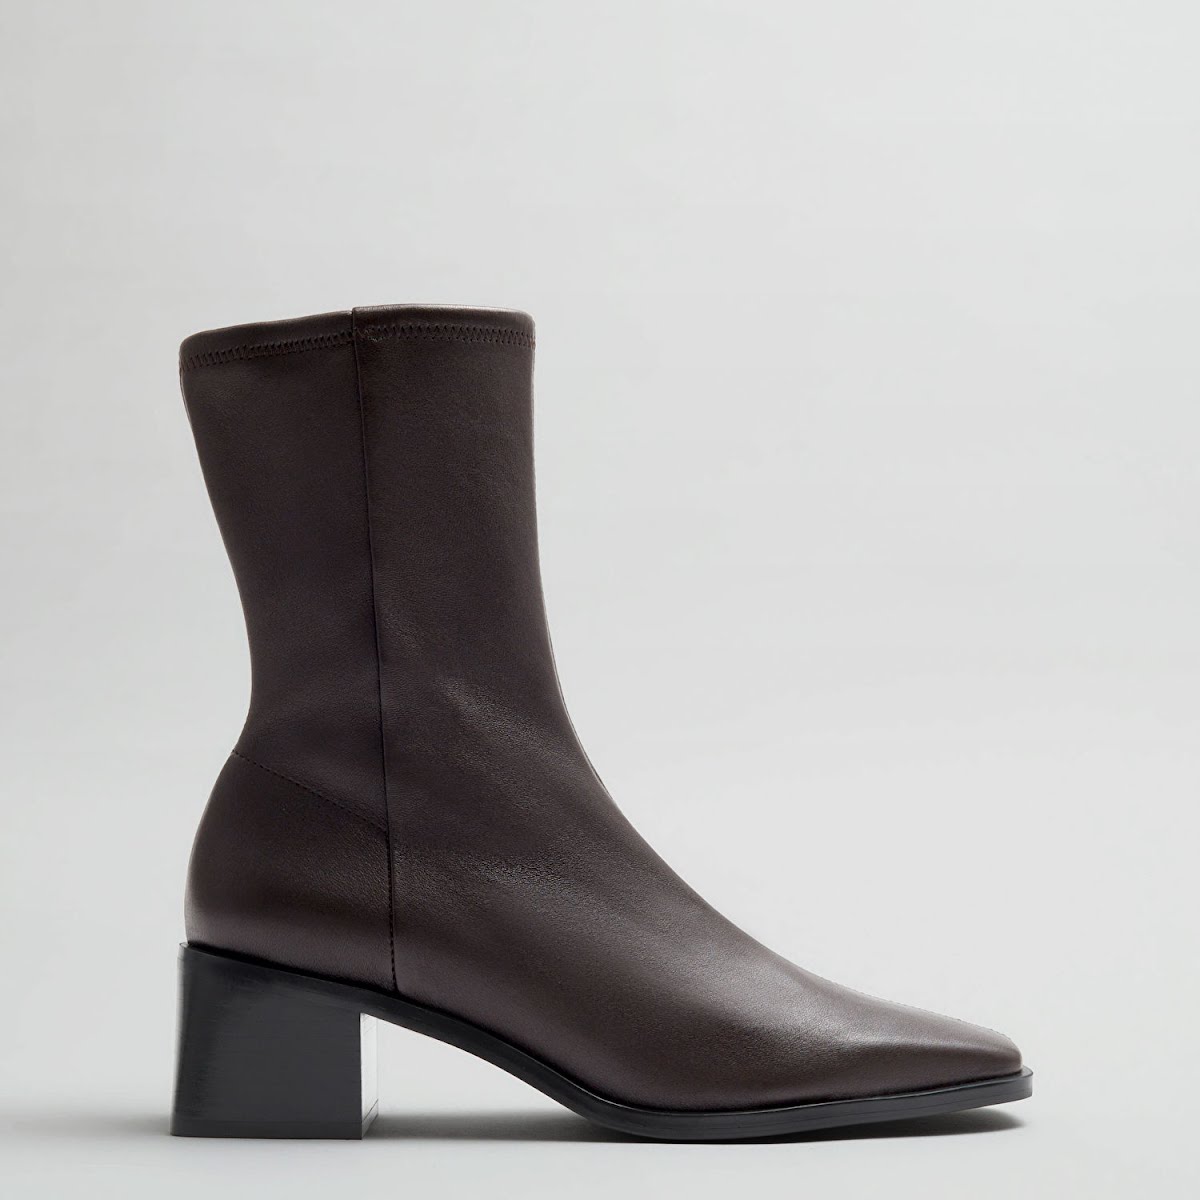 & Other Stories Leather Sock Boots, €159